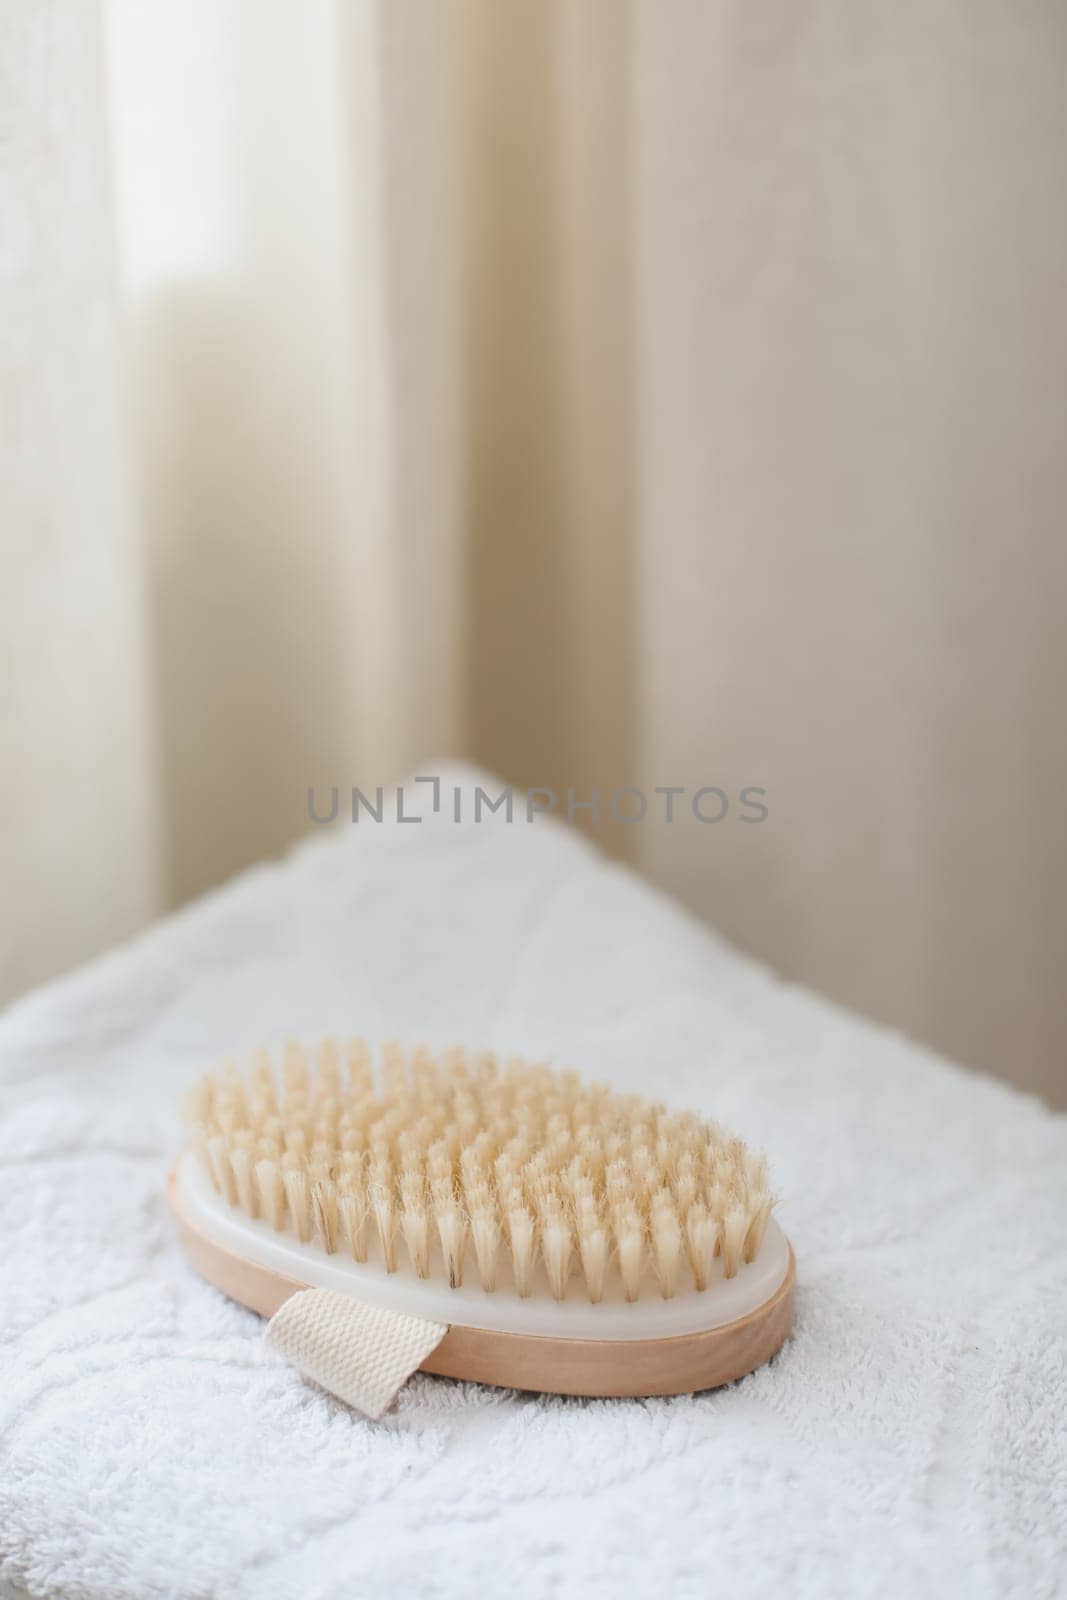 Body massage brush on white towel. body care product natural materials, zero waste, spa body care concept. Eco-friendly lifestyle by paralisart